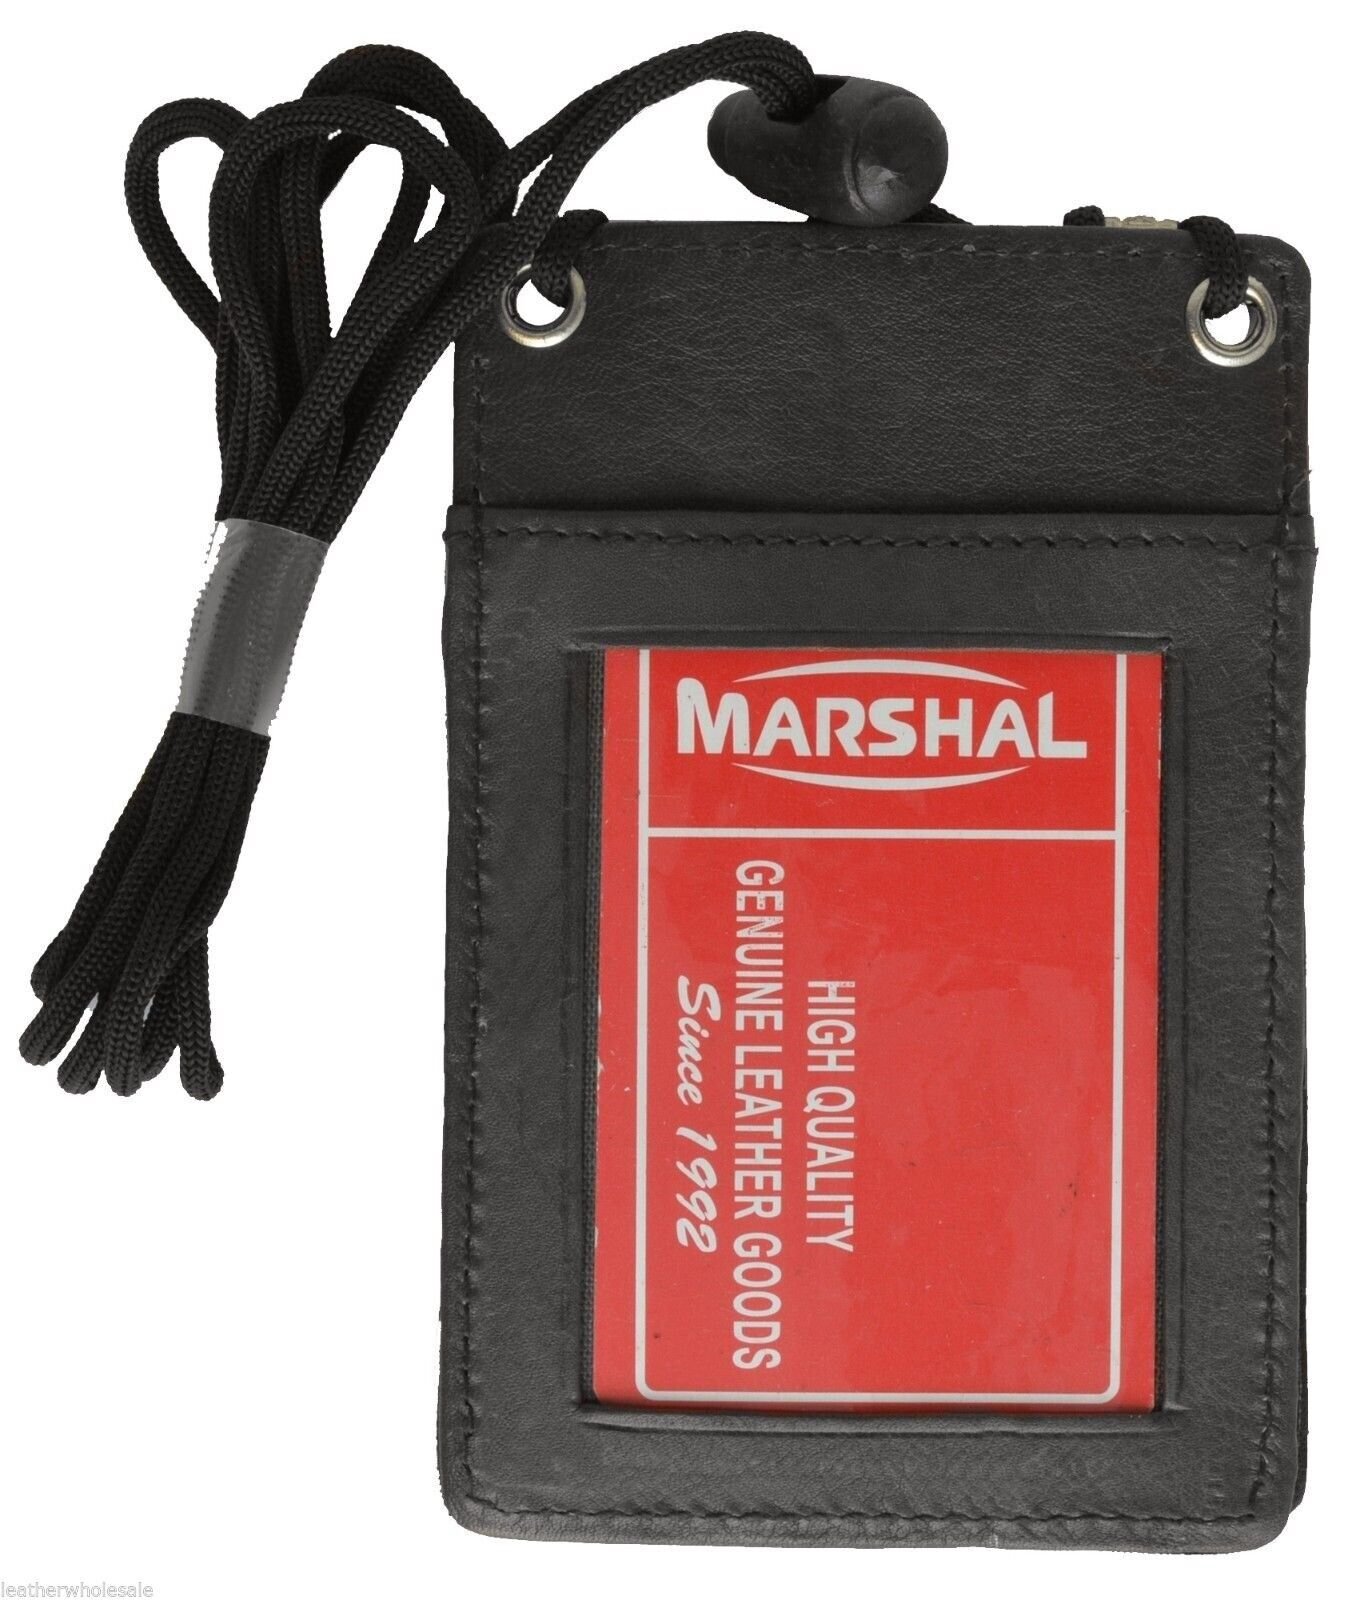 BLACK - Neck - LEATHER ID HOLDER CARD POUCH WALLET MARSHAL!!!